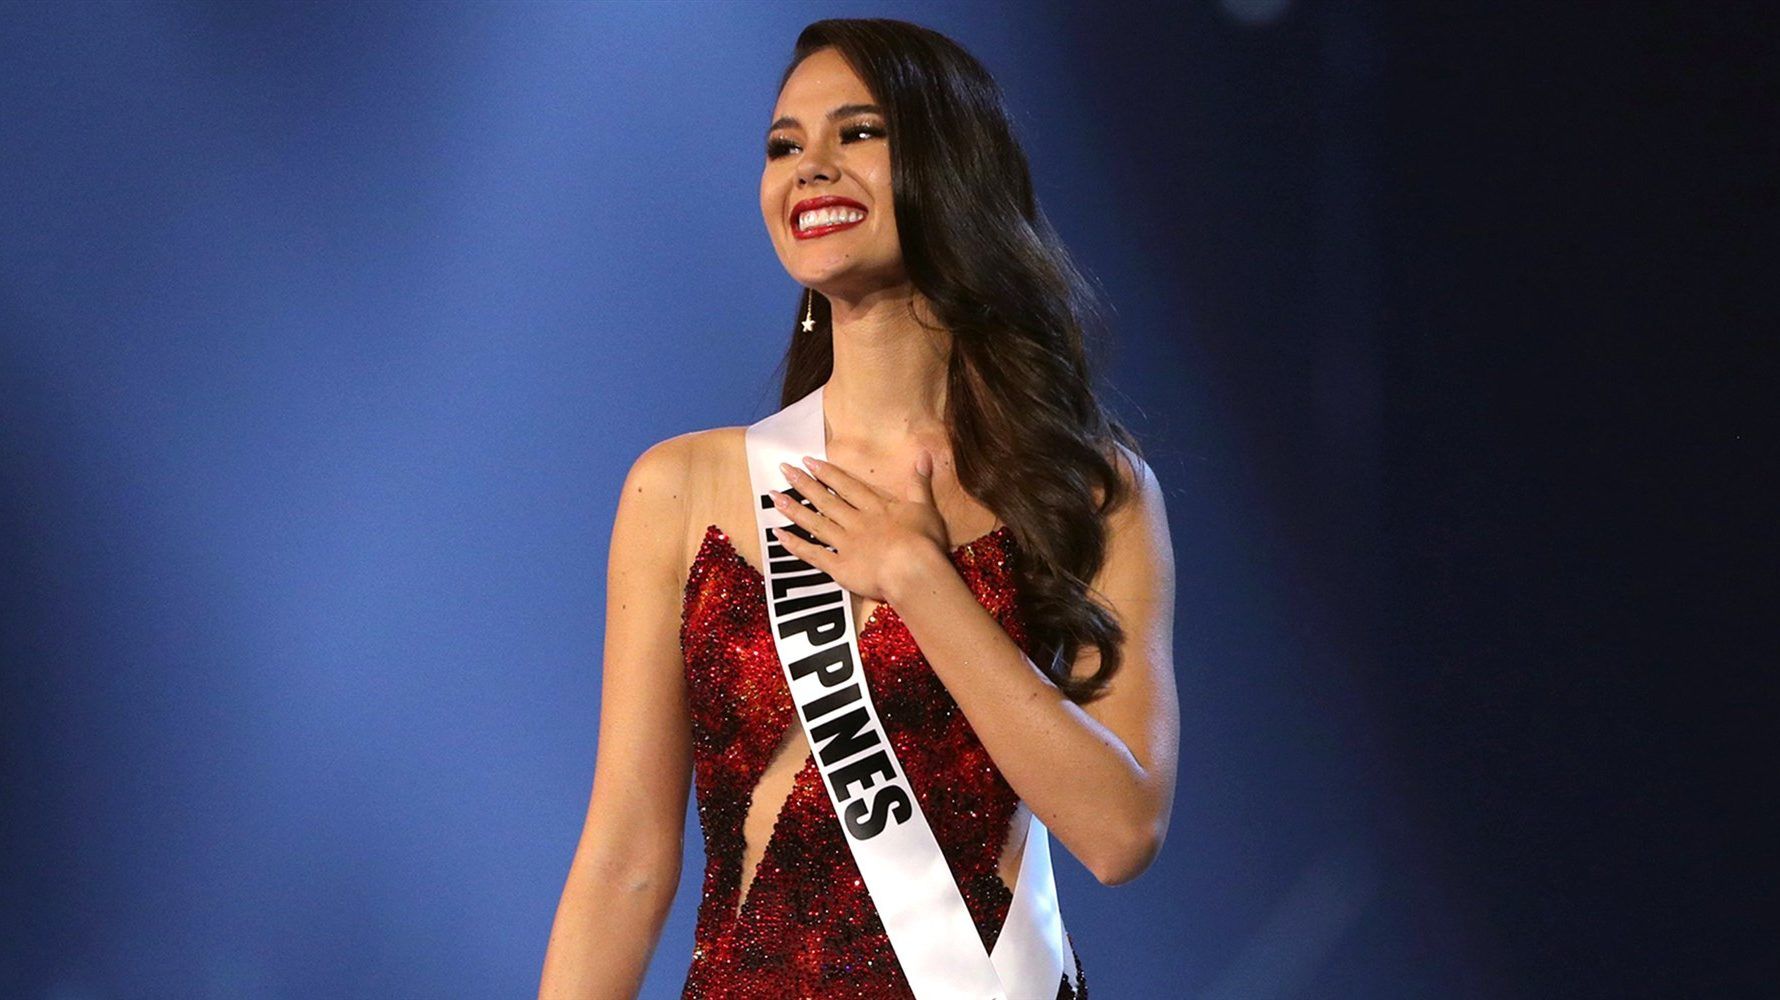 Catriona Grey Of The Philippines Wins Miss Universe 2018